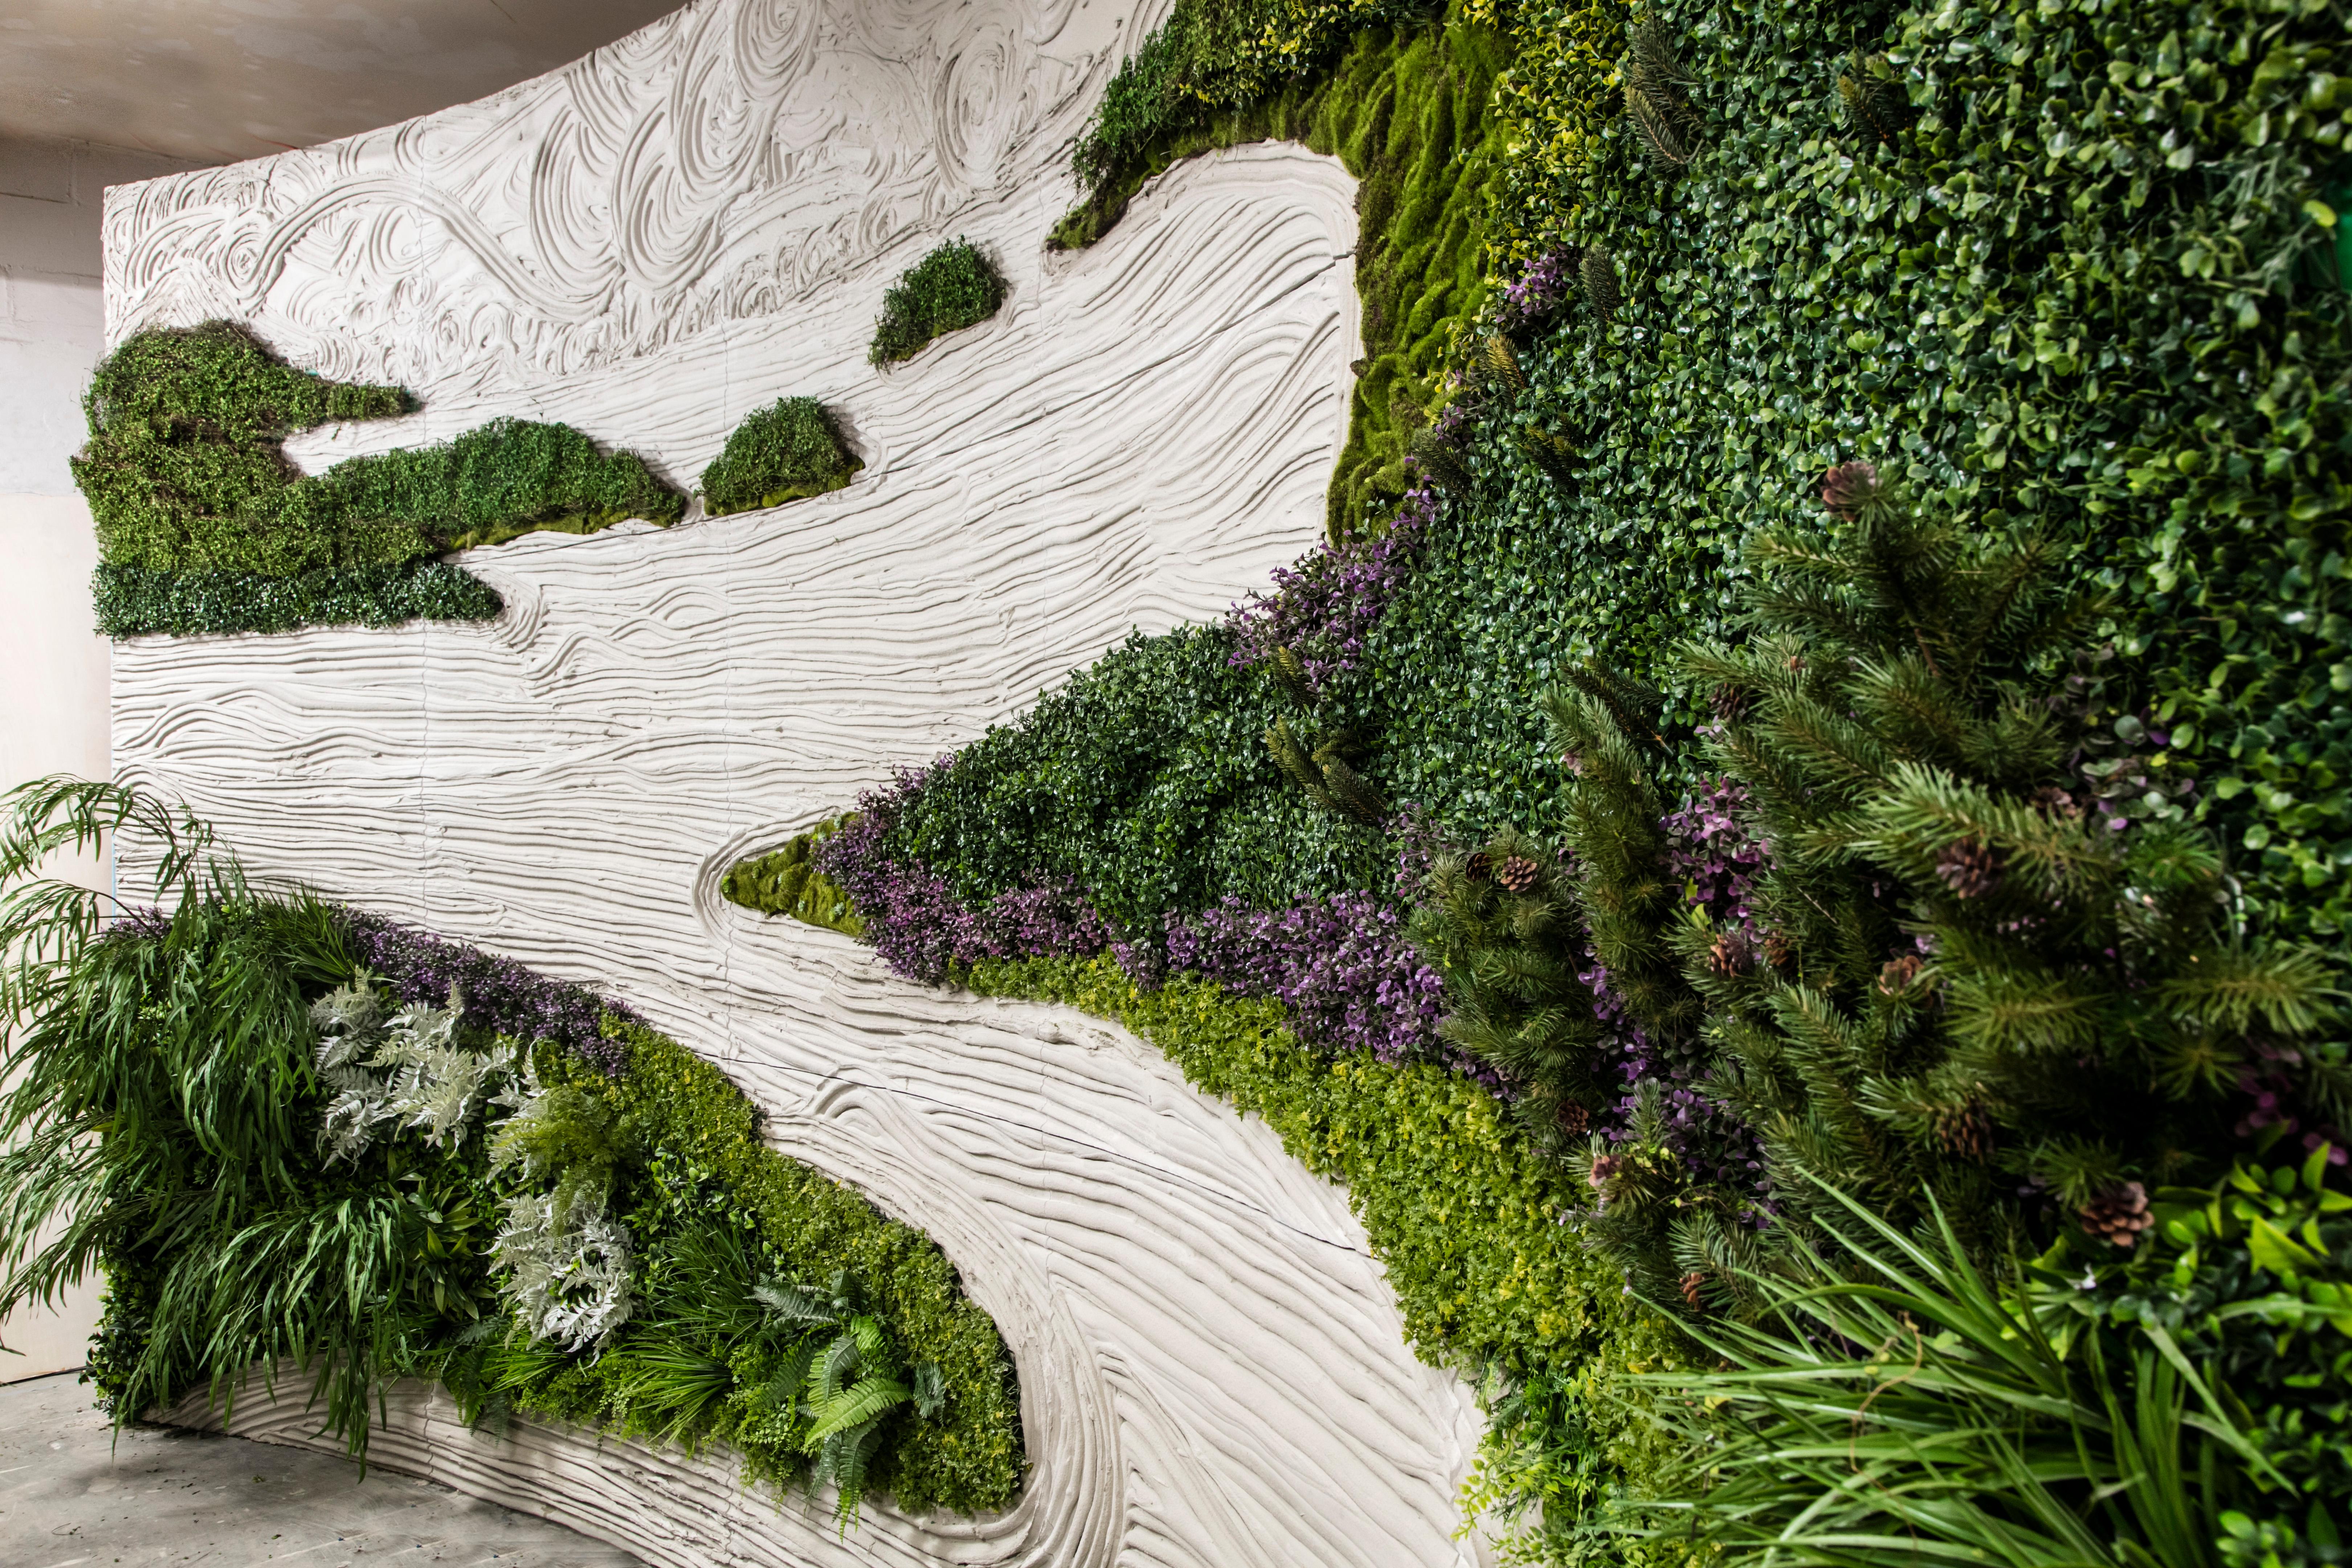 This green wall is inspired by the design logic of the natural world and traditional Japanese zen gardens. Each custom wall is available with live or artificial silk plants. Live walls are made with self contained irrigation systems, allowing easy